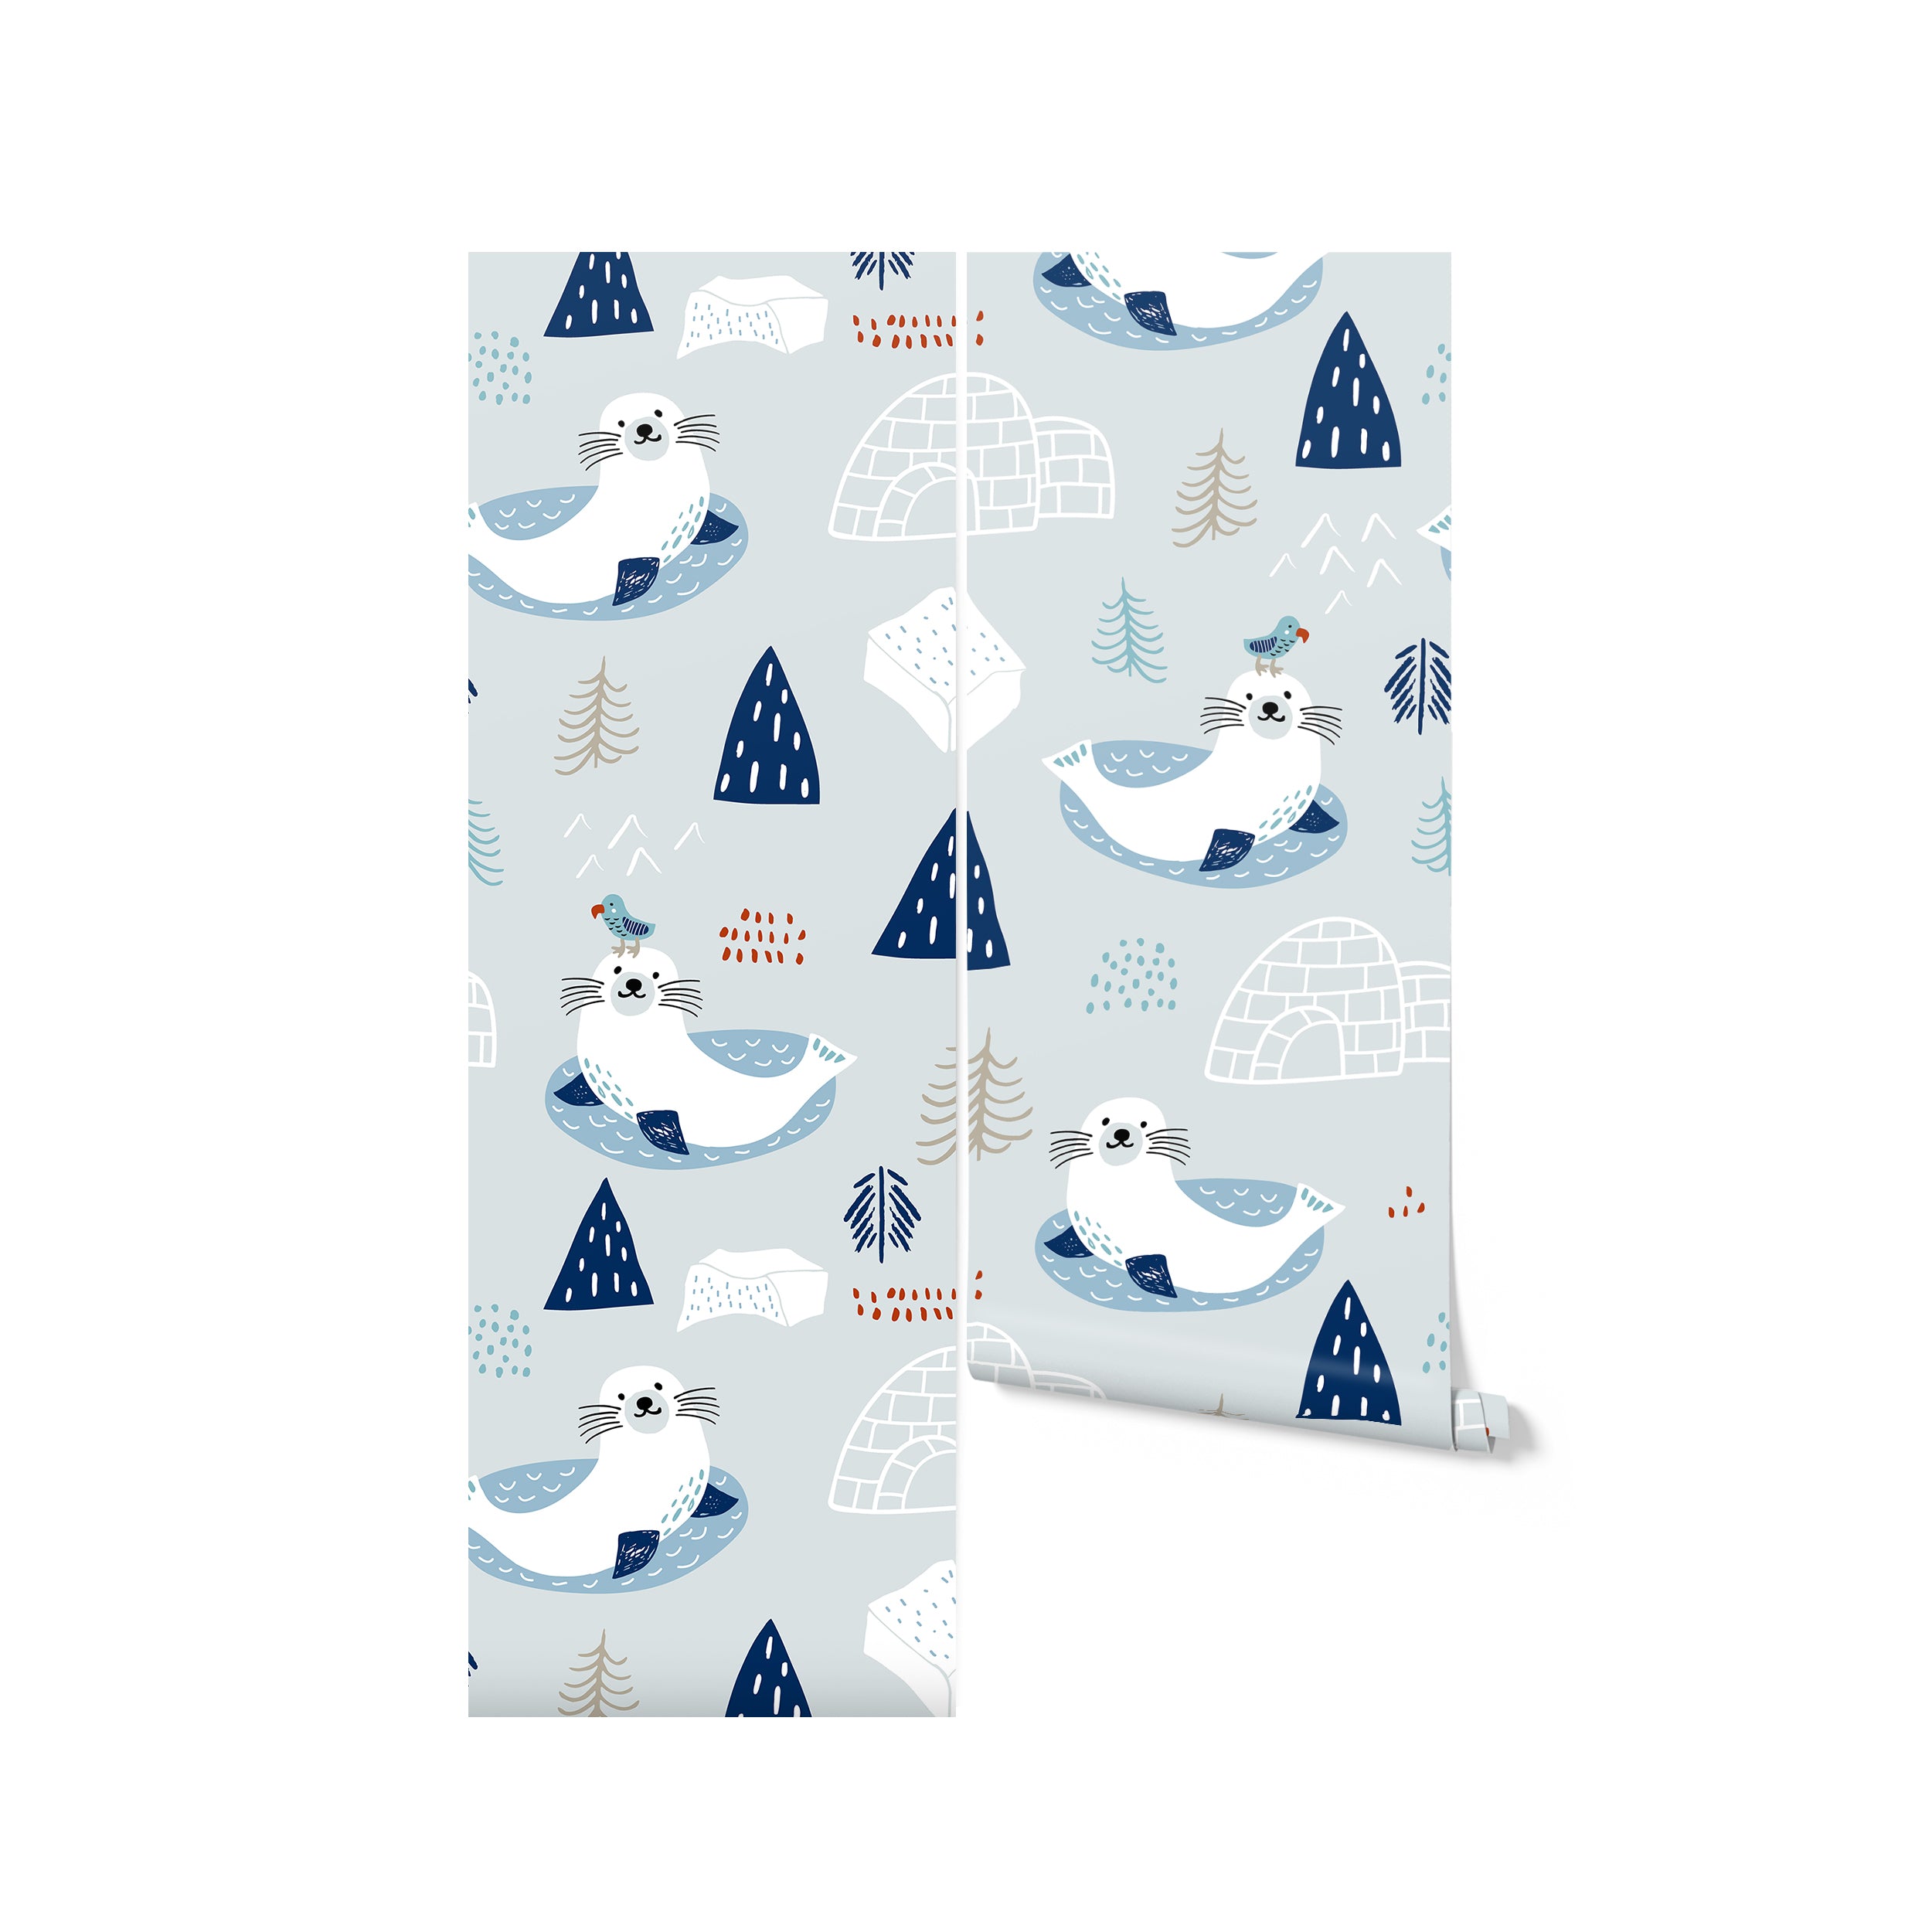 A roll of "Nordic Seal Wallpaper" displaying a delightful scene of seals on ice floats amidst a whimsical Arctic landscape of igloos, trees, and mountains. The seals, trees, and igloos are illustrated in shades of blue and white, creating a peaceful and imaginative setting for any child's room.